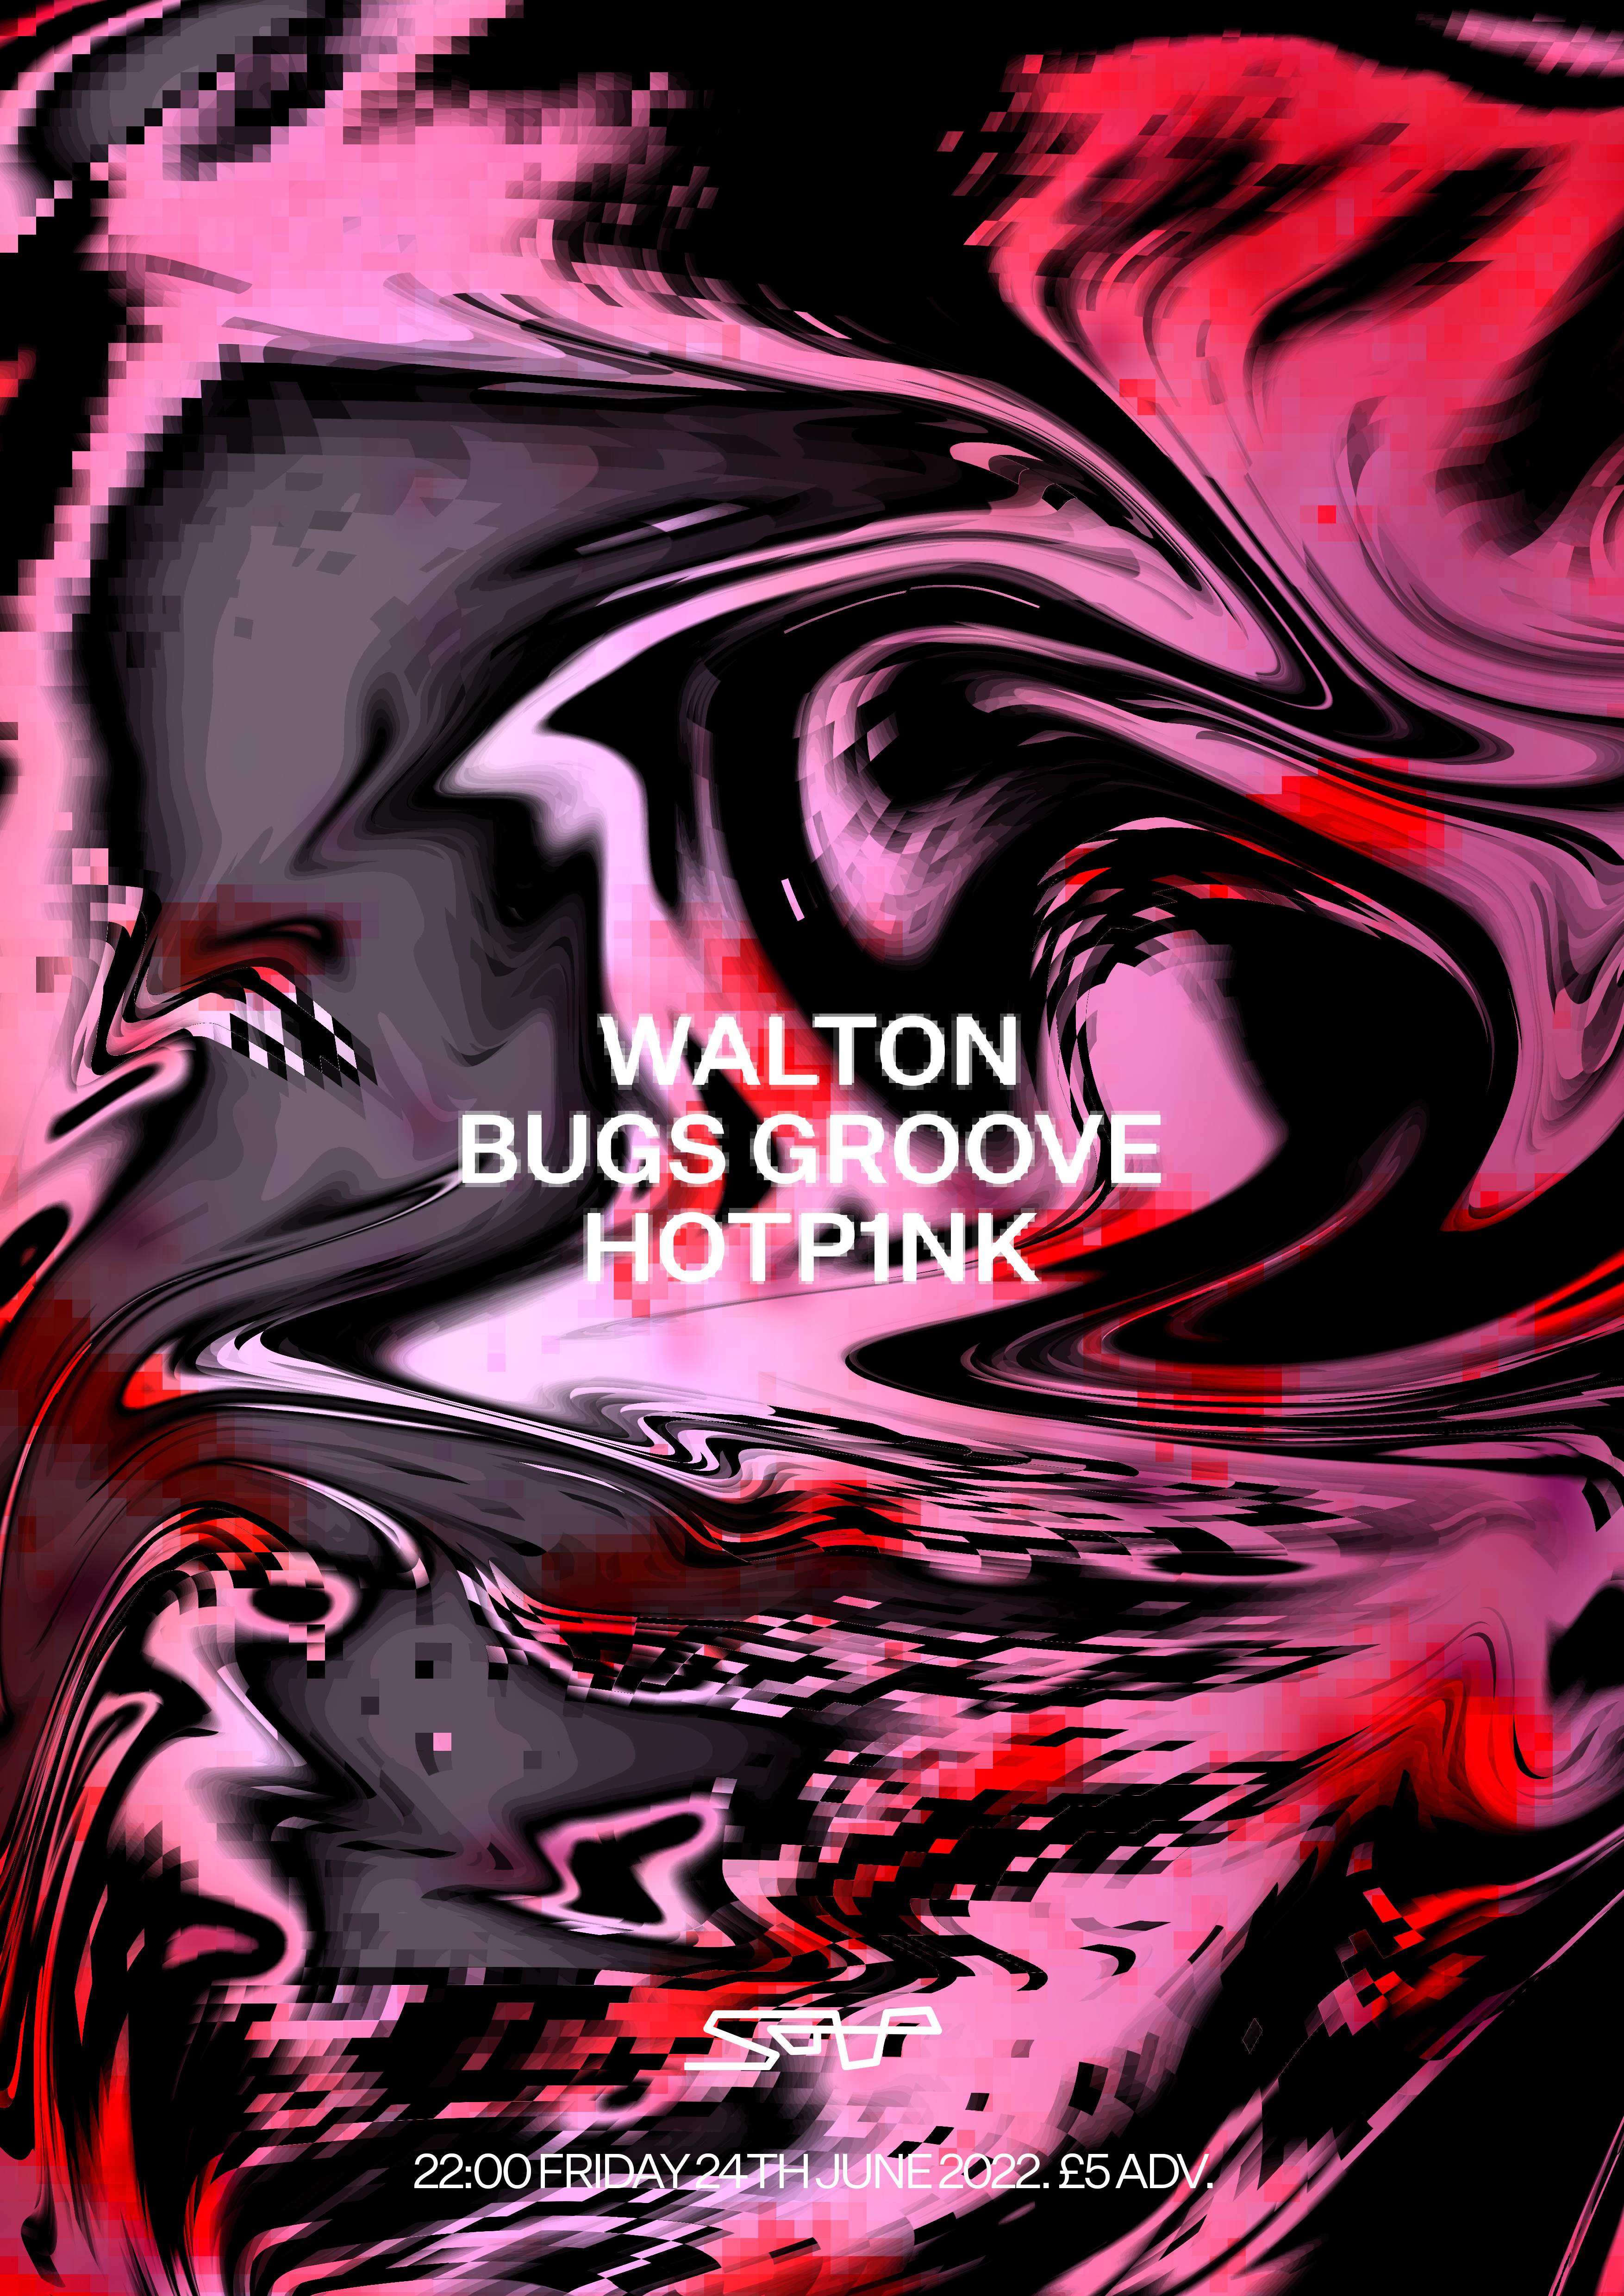 Soup presents: Walton, Bugs Groove, HOTP1NK - フライヤー表